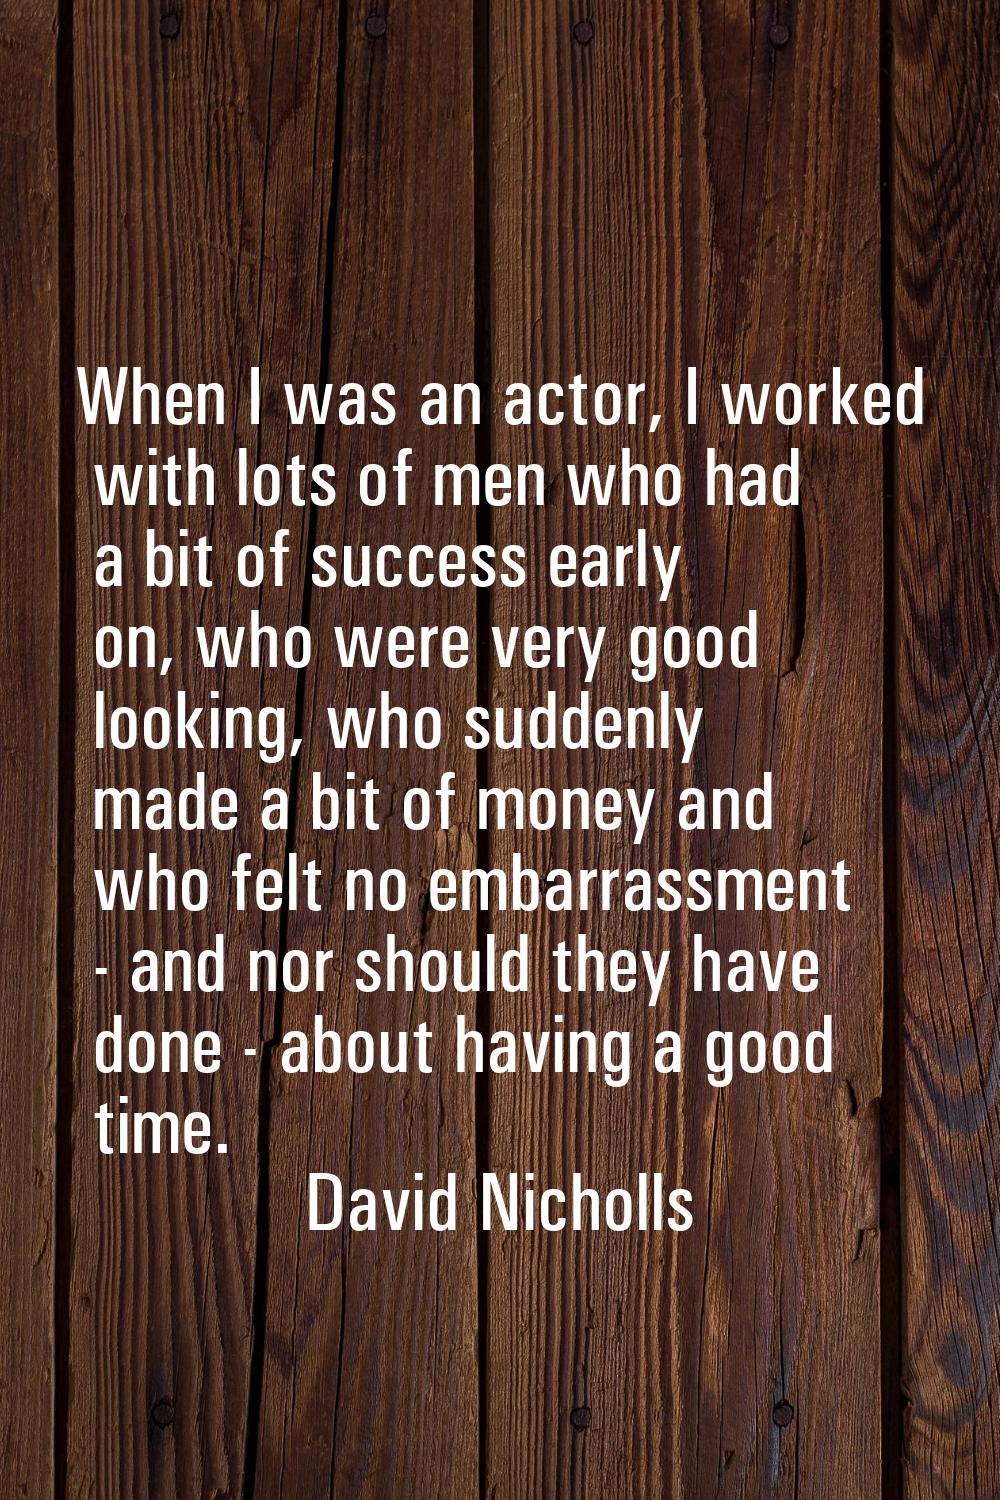 When I was an actor, I worked with lots of men who had a bit of success early on, who were very goo